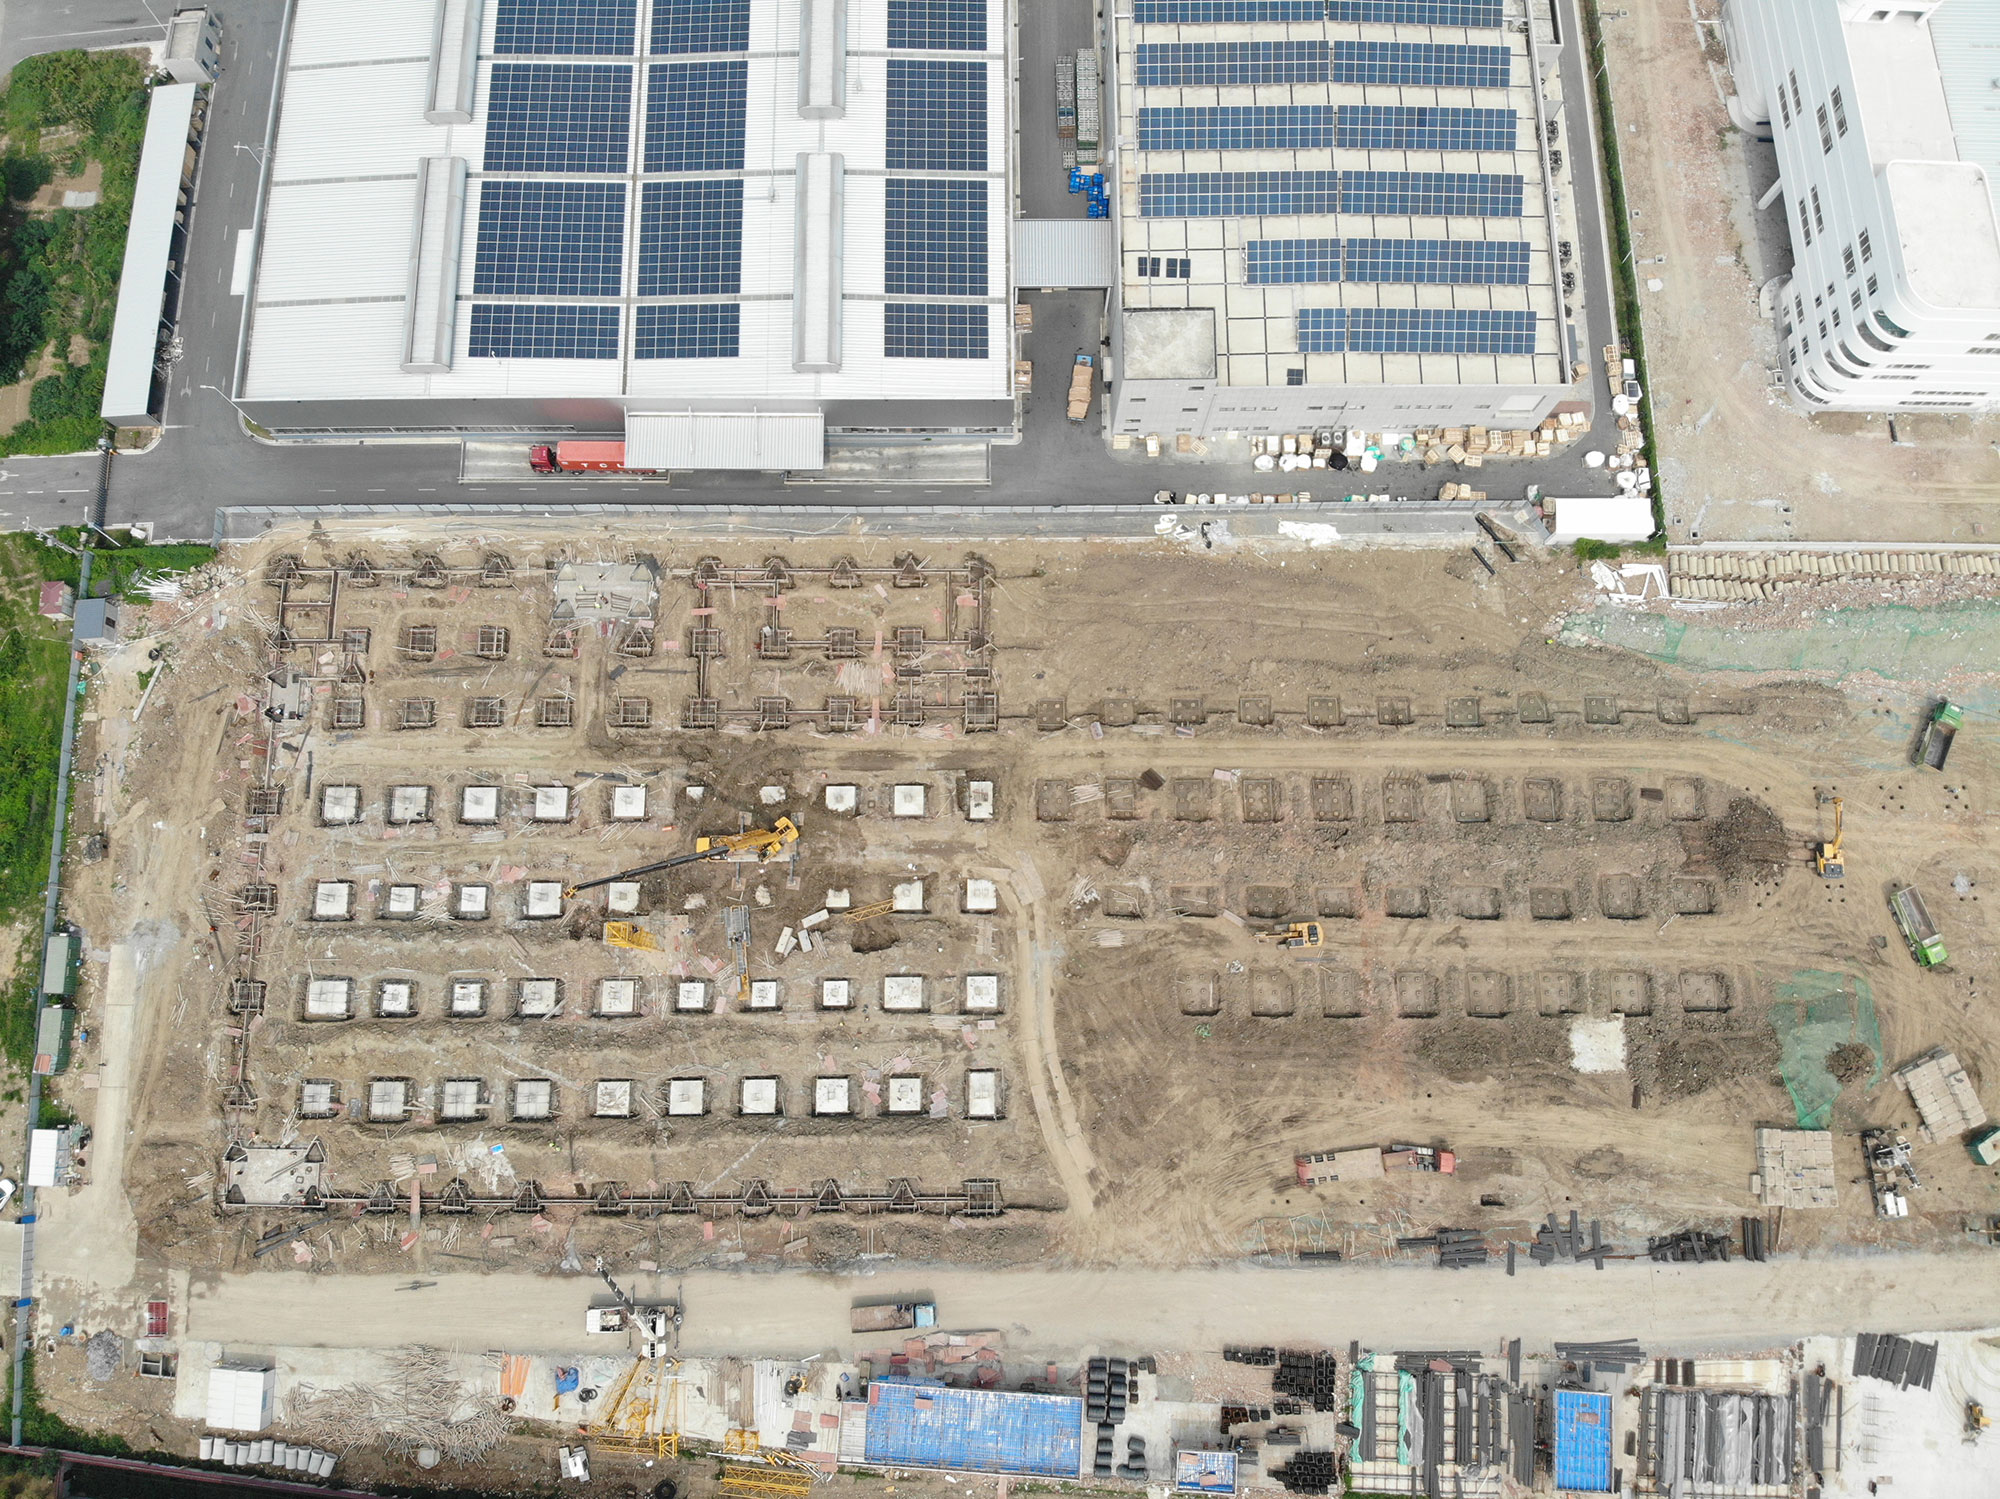 Leapton Solar Phase II 3GW plant is under construction